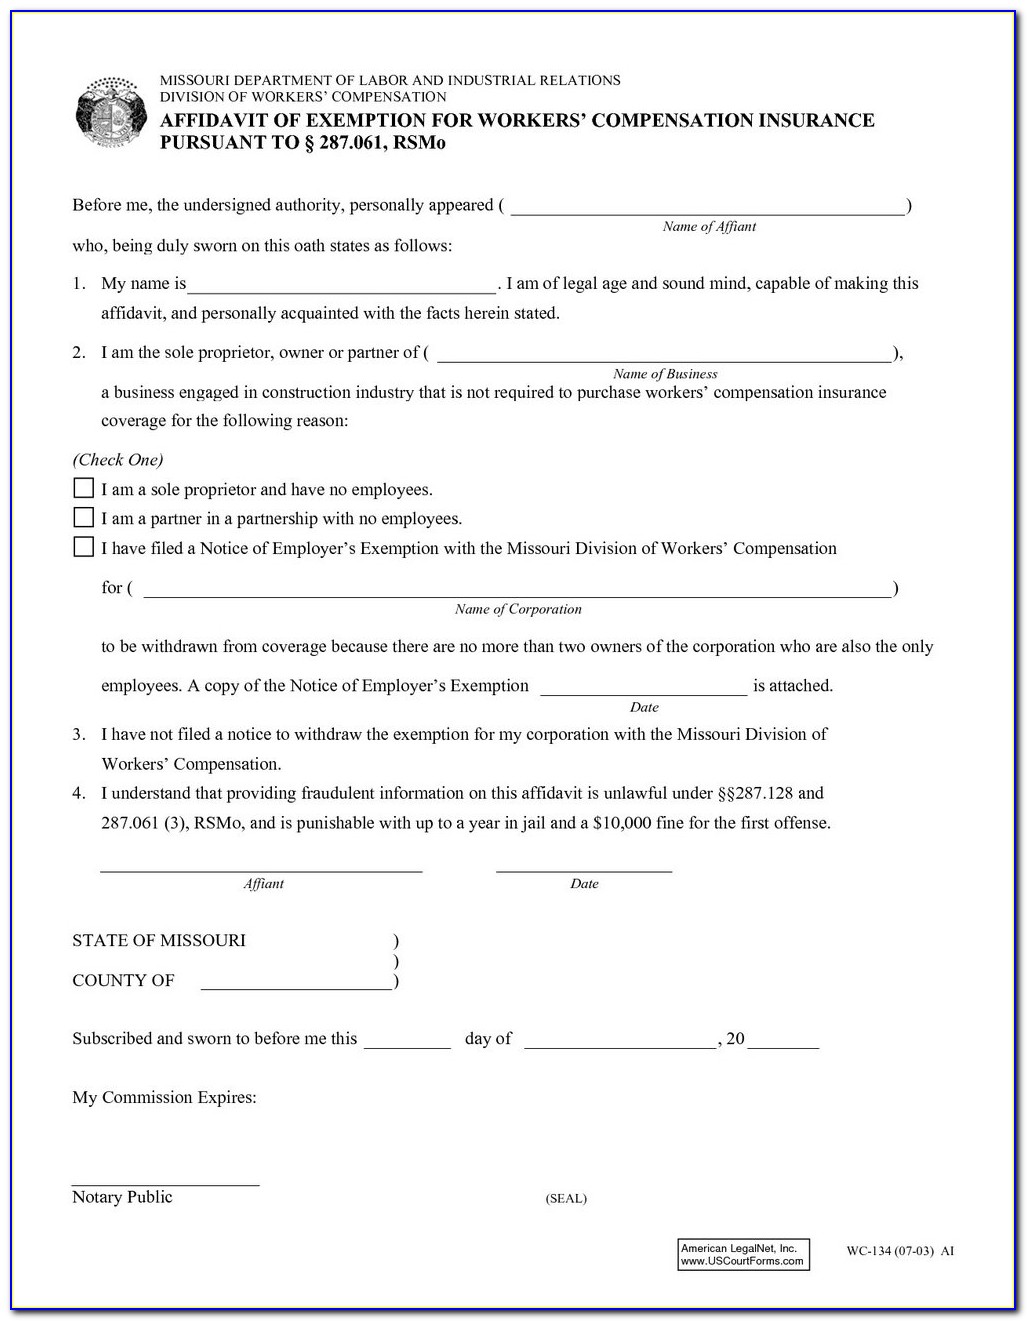 Texas Work Comp Officer Exclusion Form